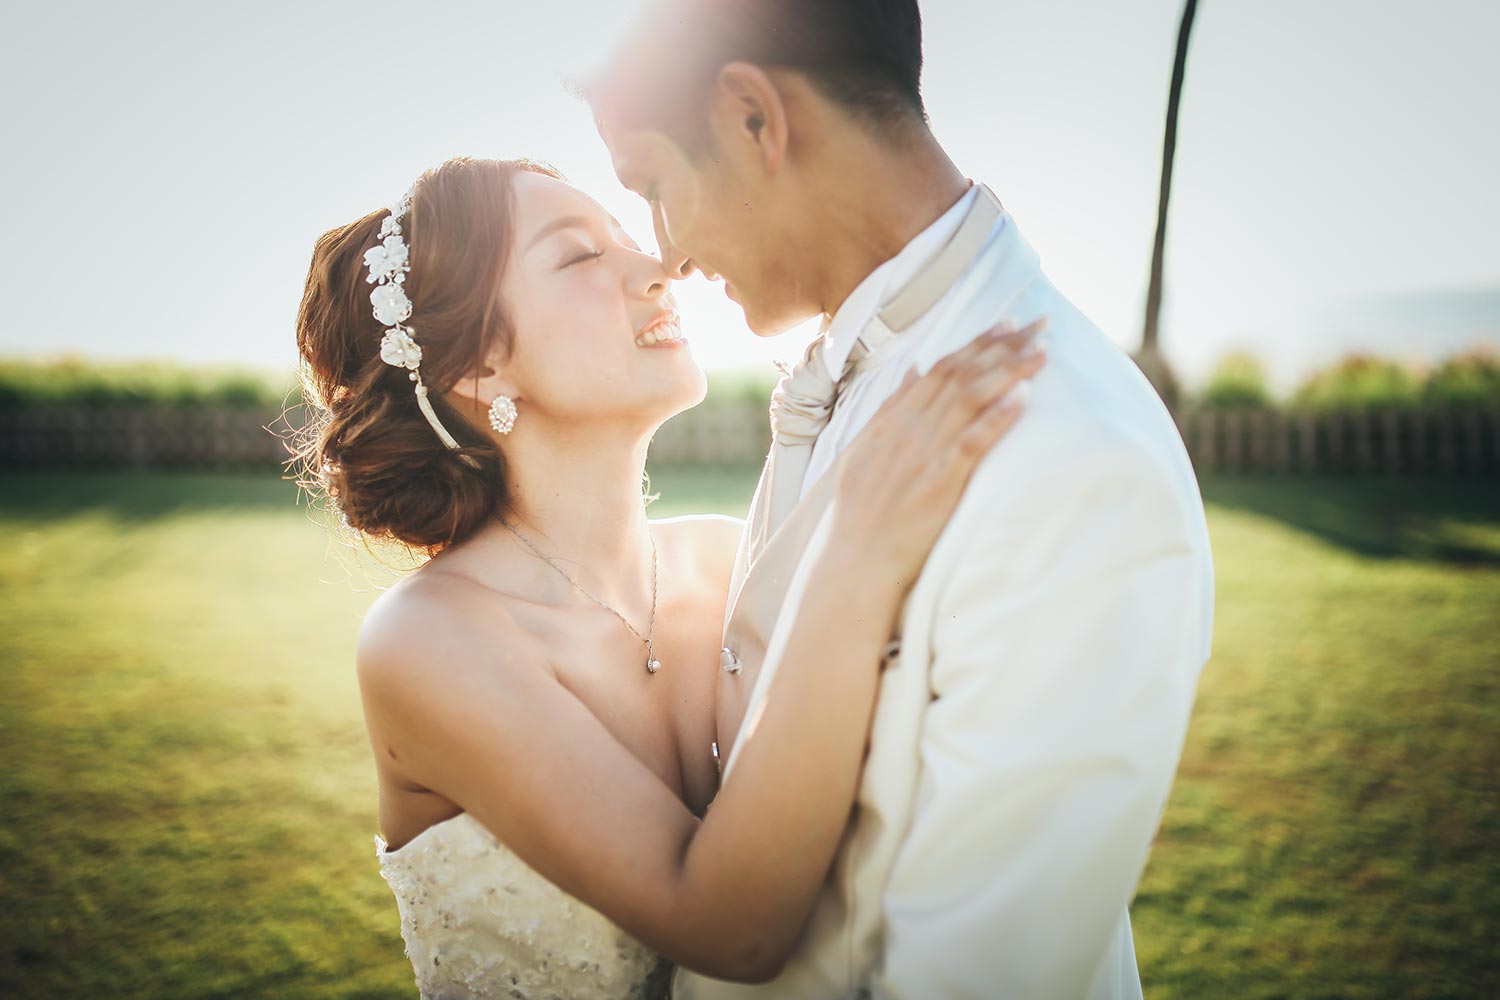 Why Wedding Photos are So Important for Your Life in The Future